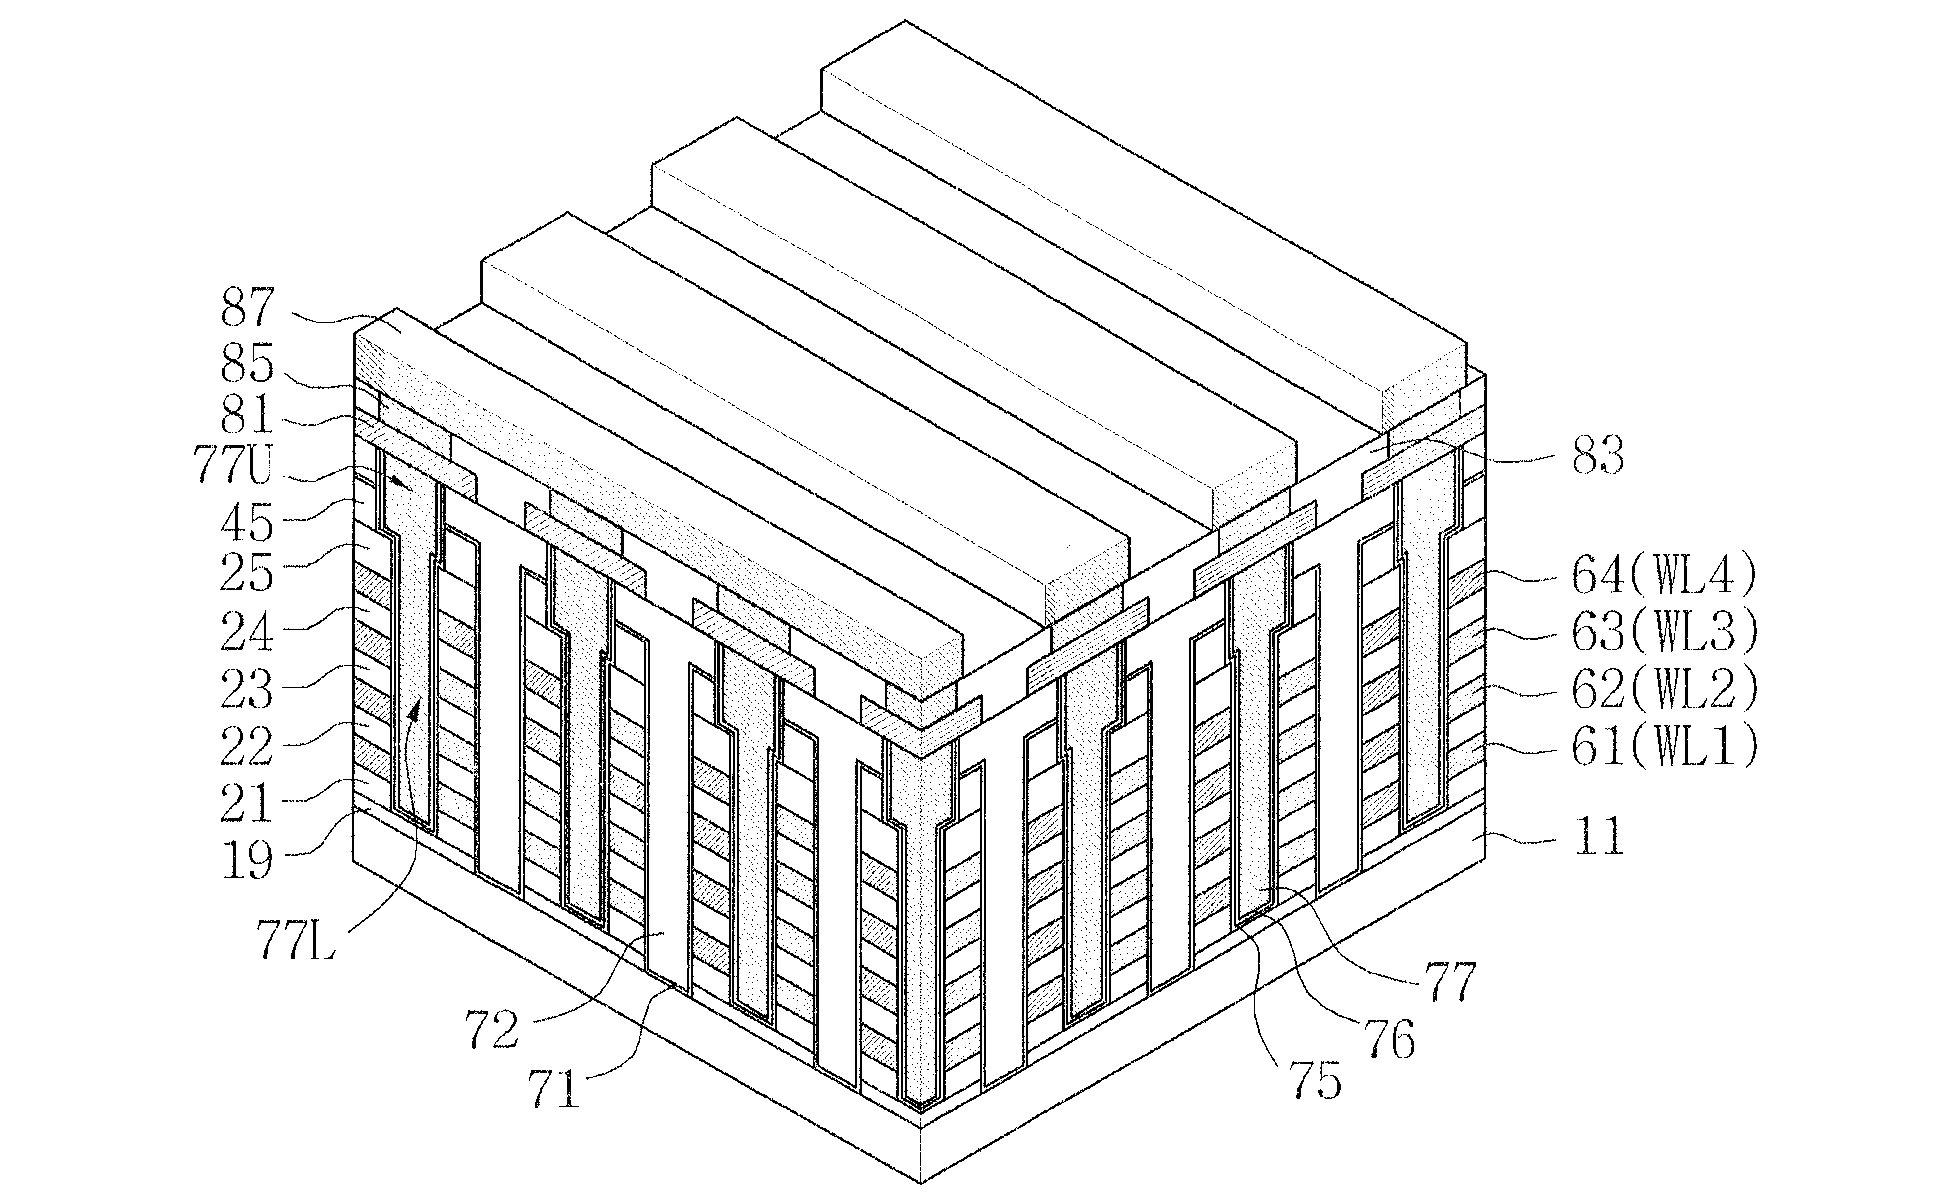 Non-volatile memory device having a resistance-changeable element and method of forming the same